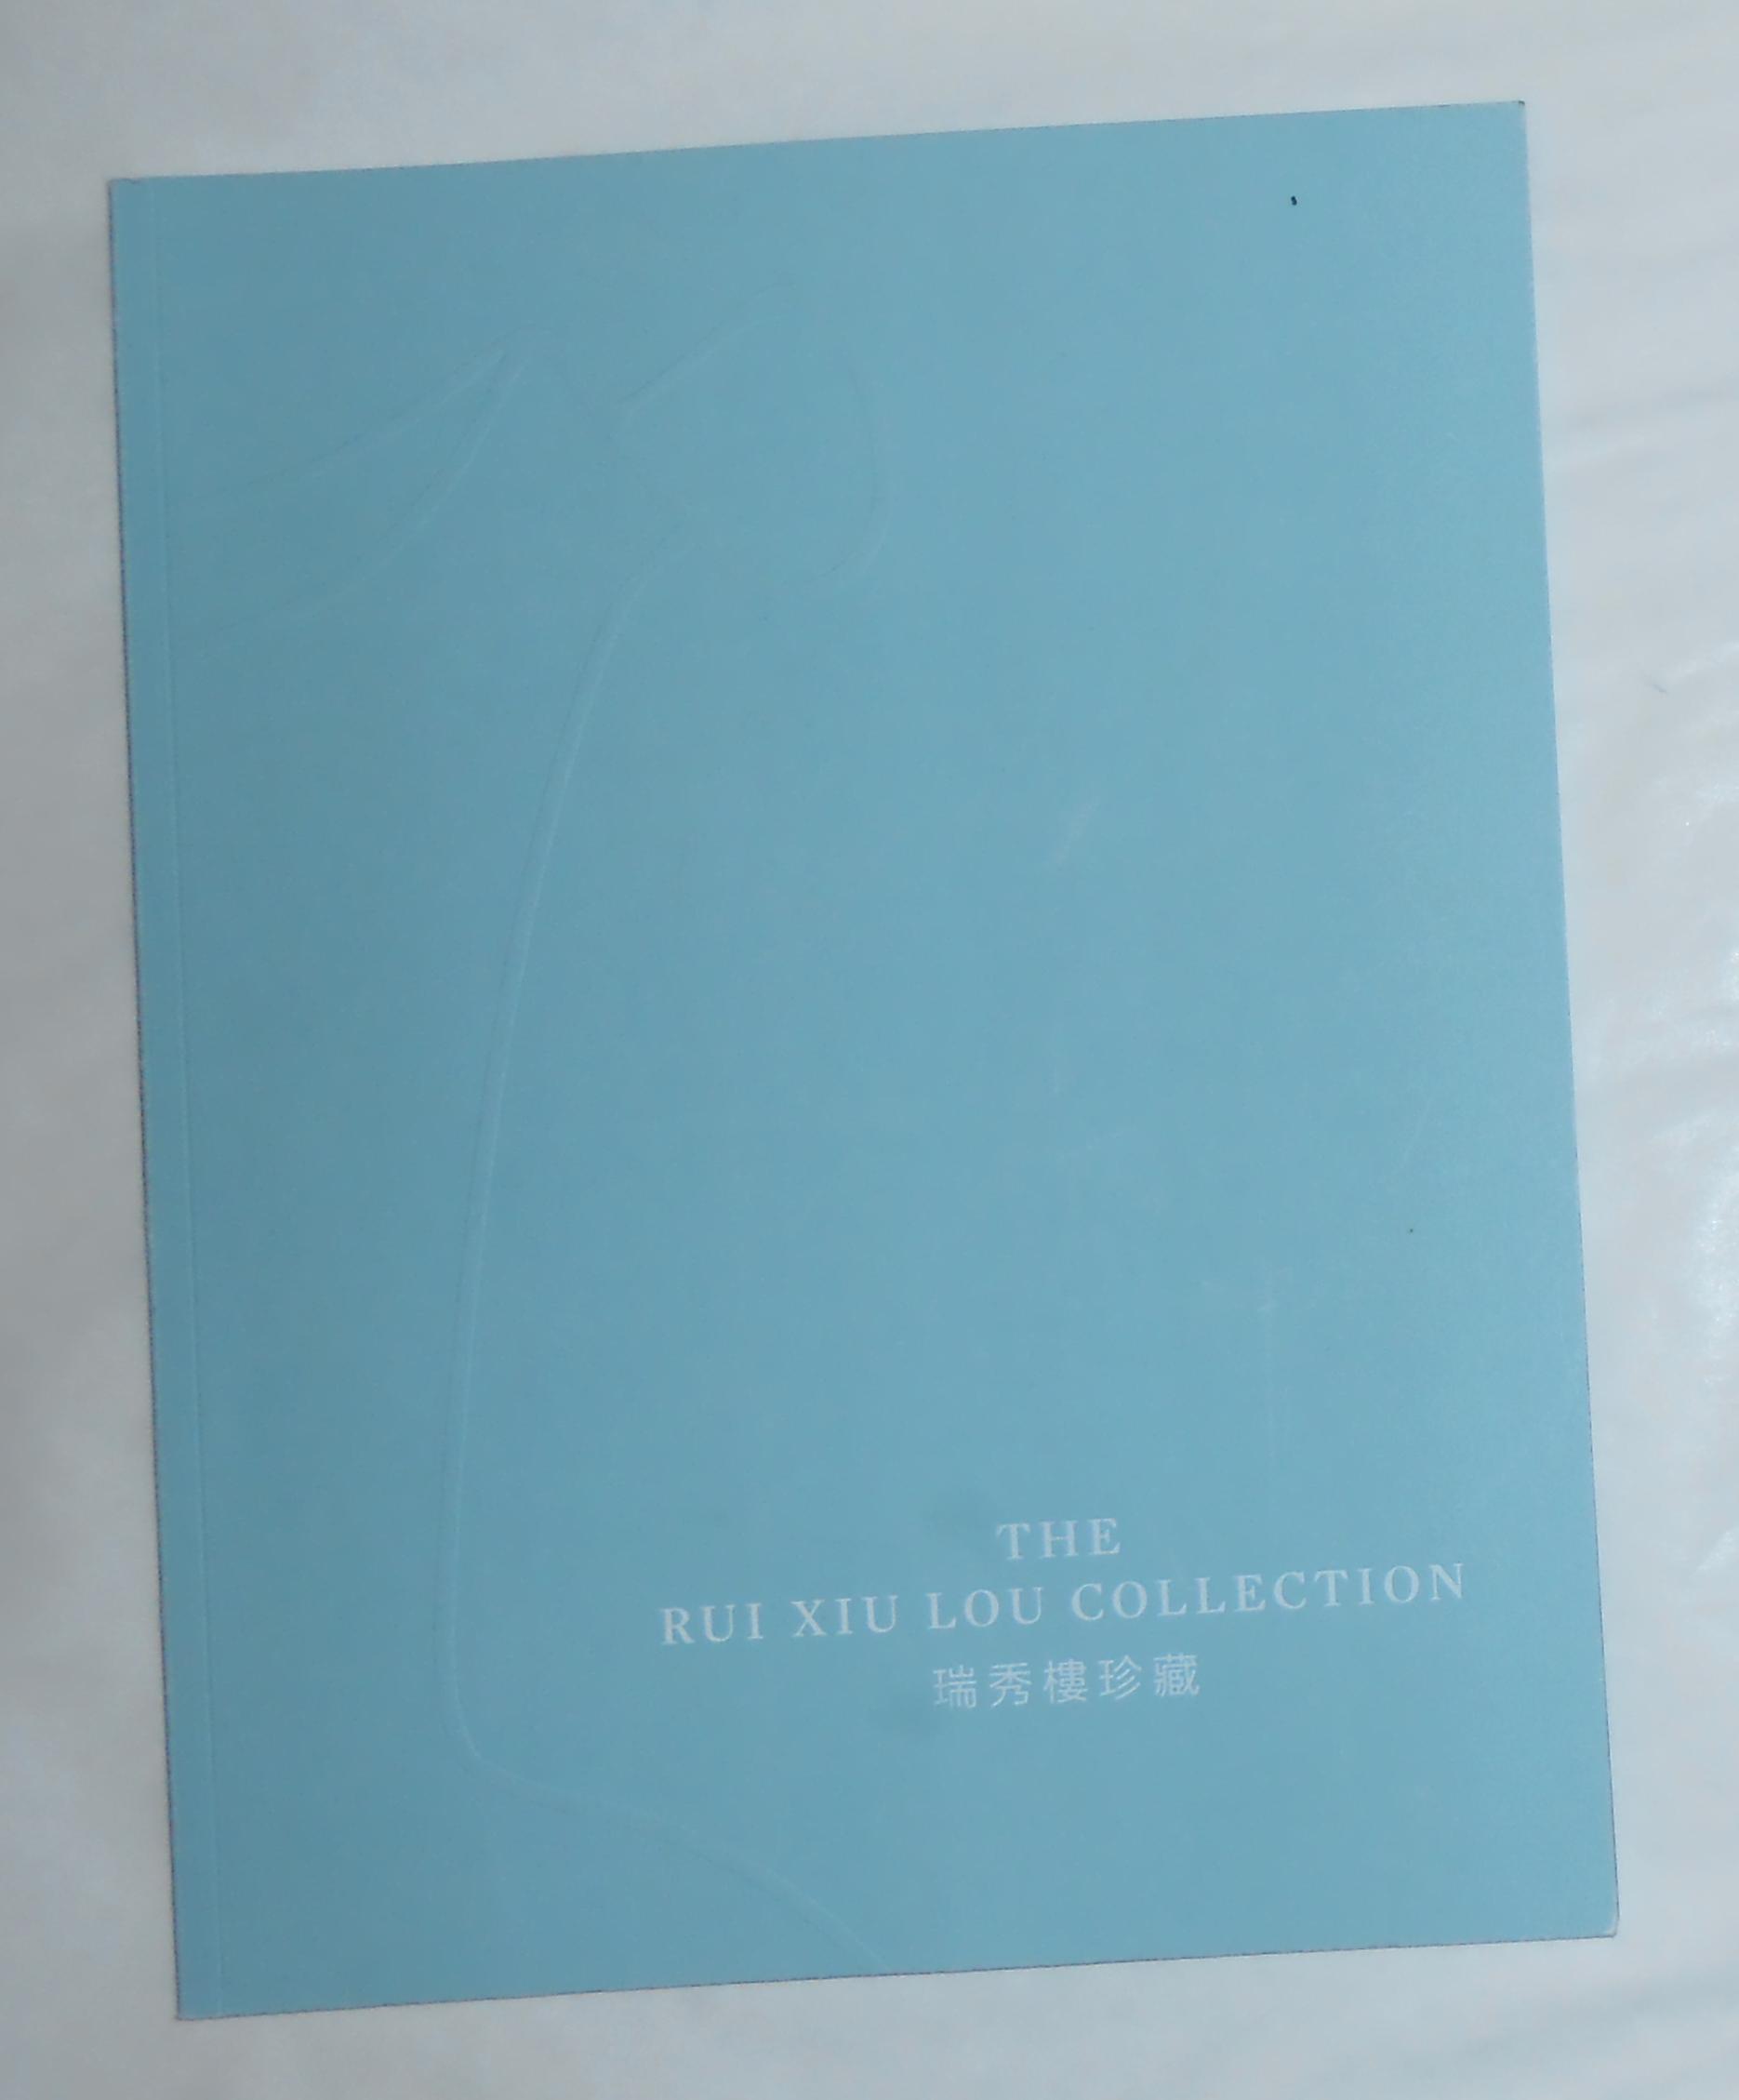 Rui Xiu Lou Collection (Sotheby's, London 15 May 2019 - Auction ...